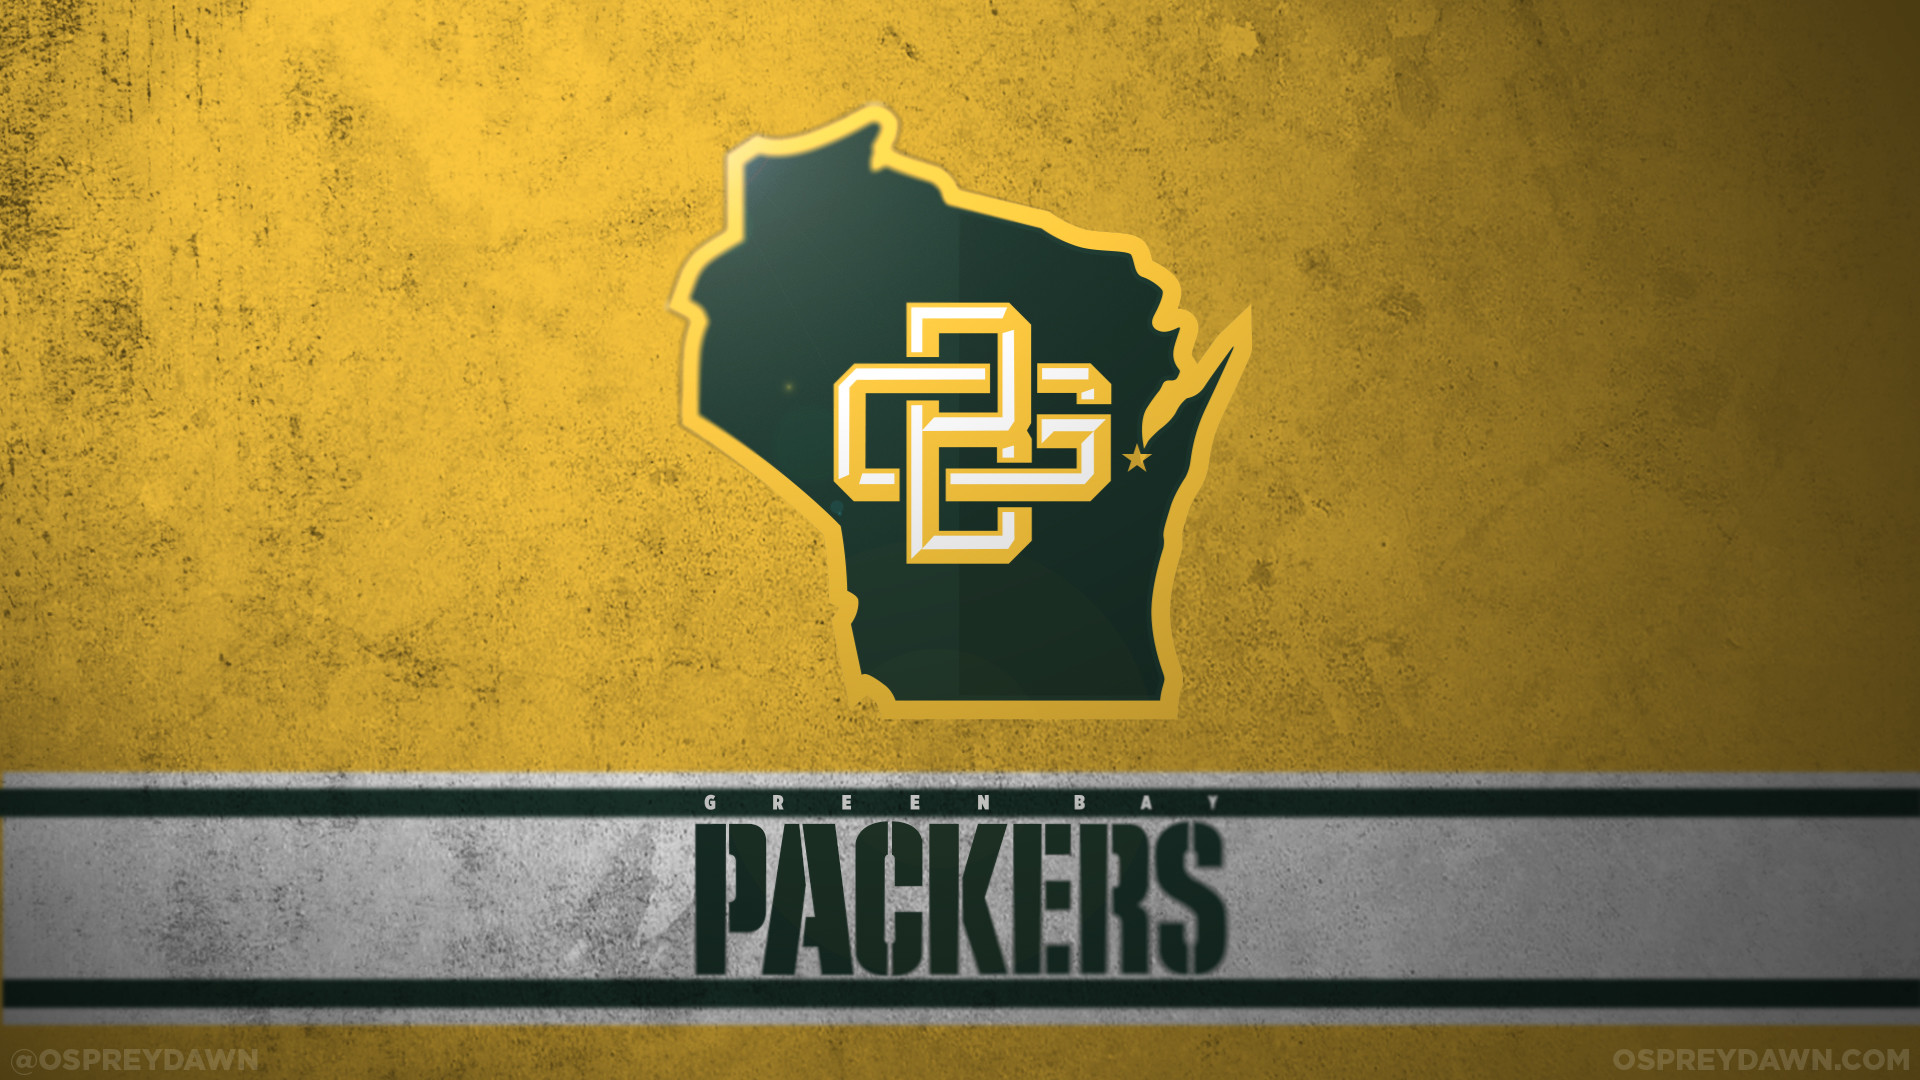 1920x1080 1000+ images about Green Bay Packers interlocked GB monogram logo on  Pinterest | Green bay packers, Green and gold and Cap d'agde